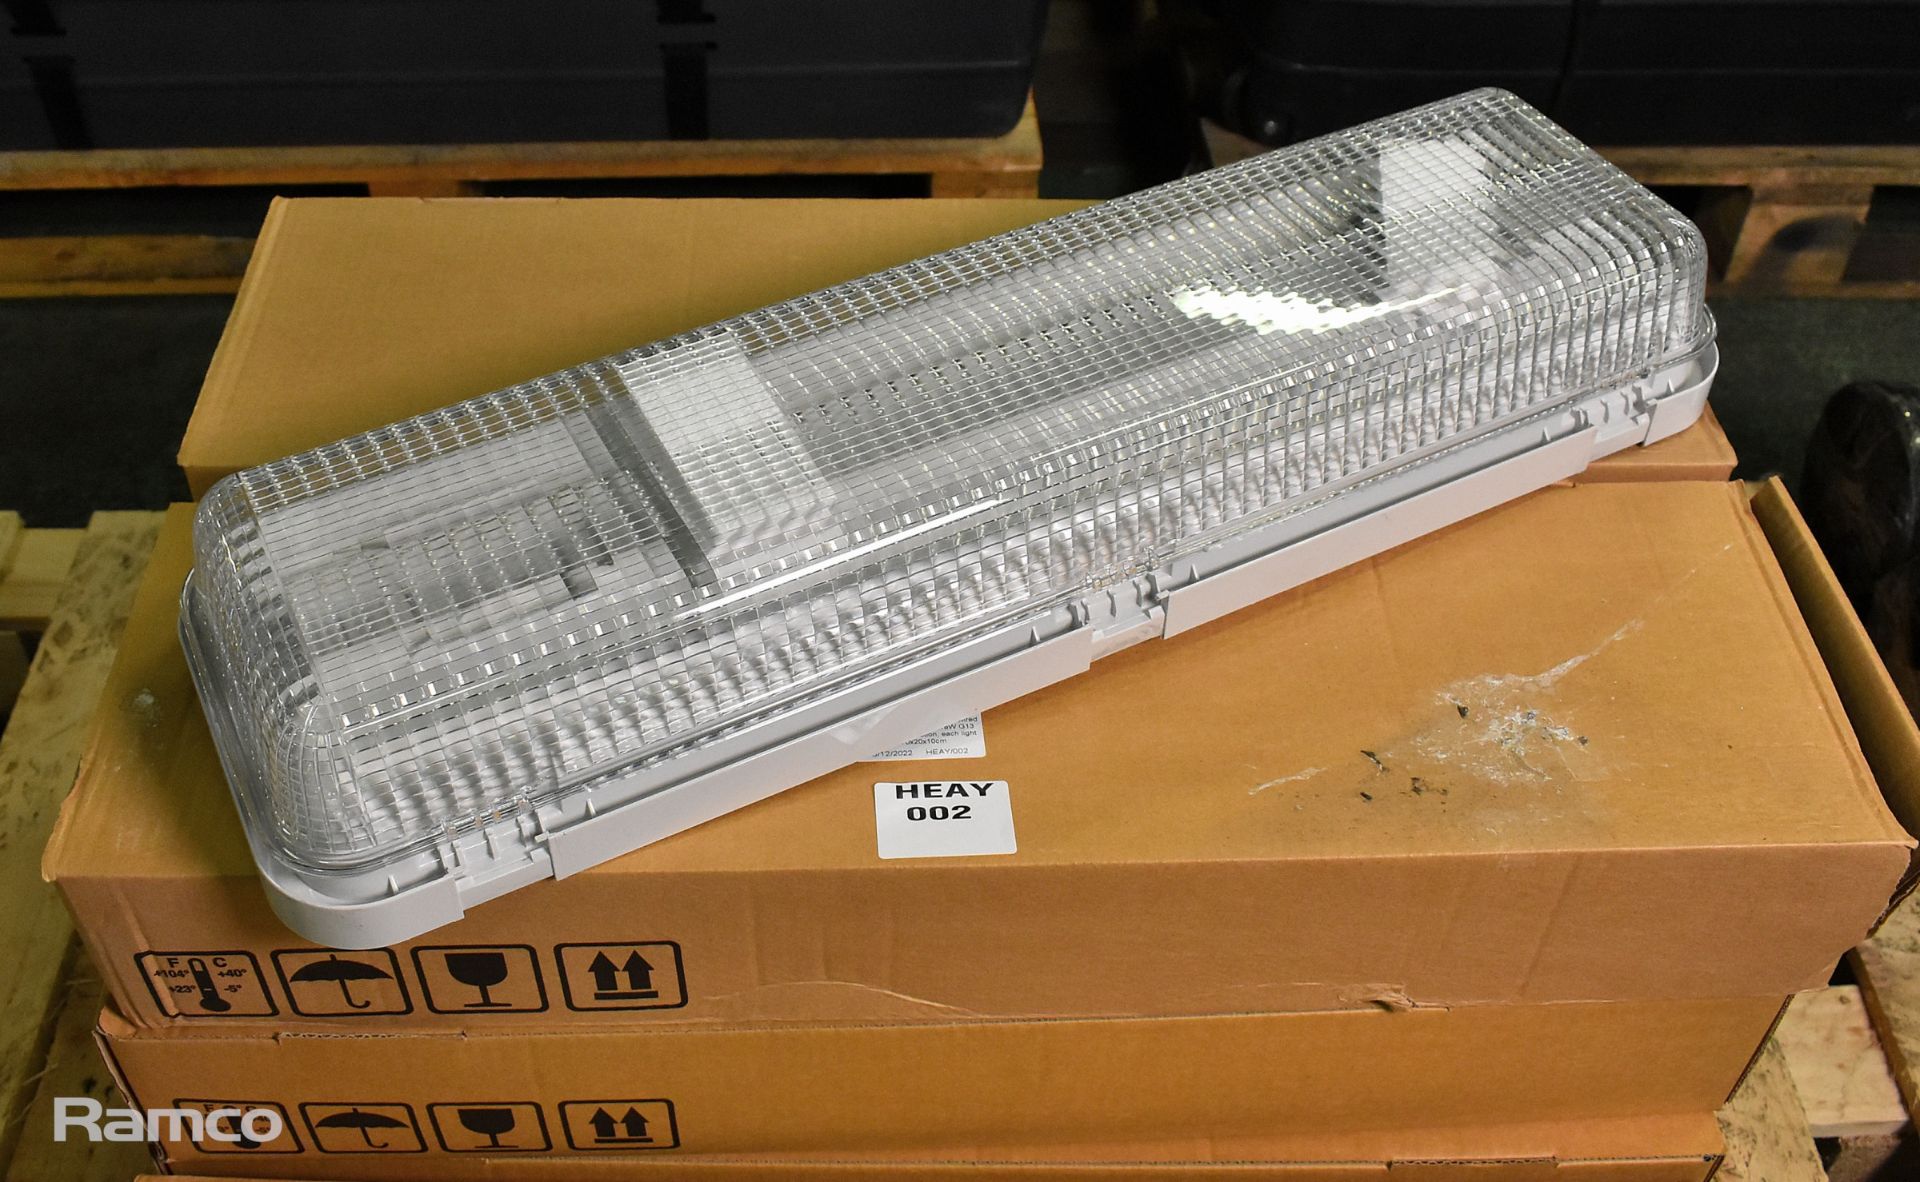 12x Gewiss GW 80 104 unwired lighting assembly, 2x18W G13 max, IP55 protection - Image 2 of 3